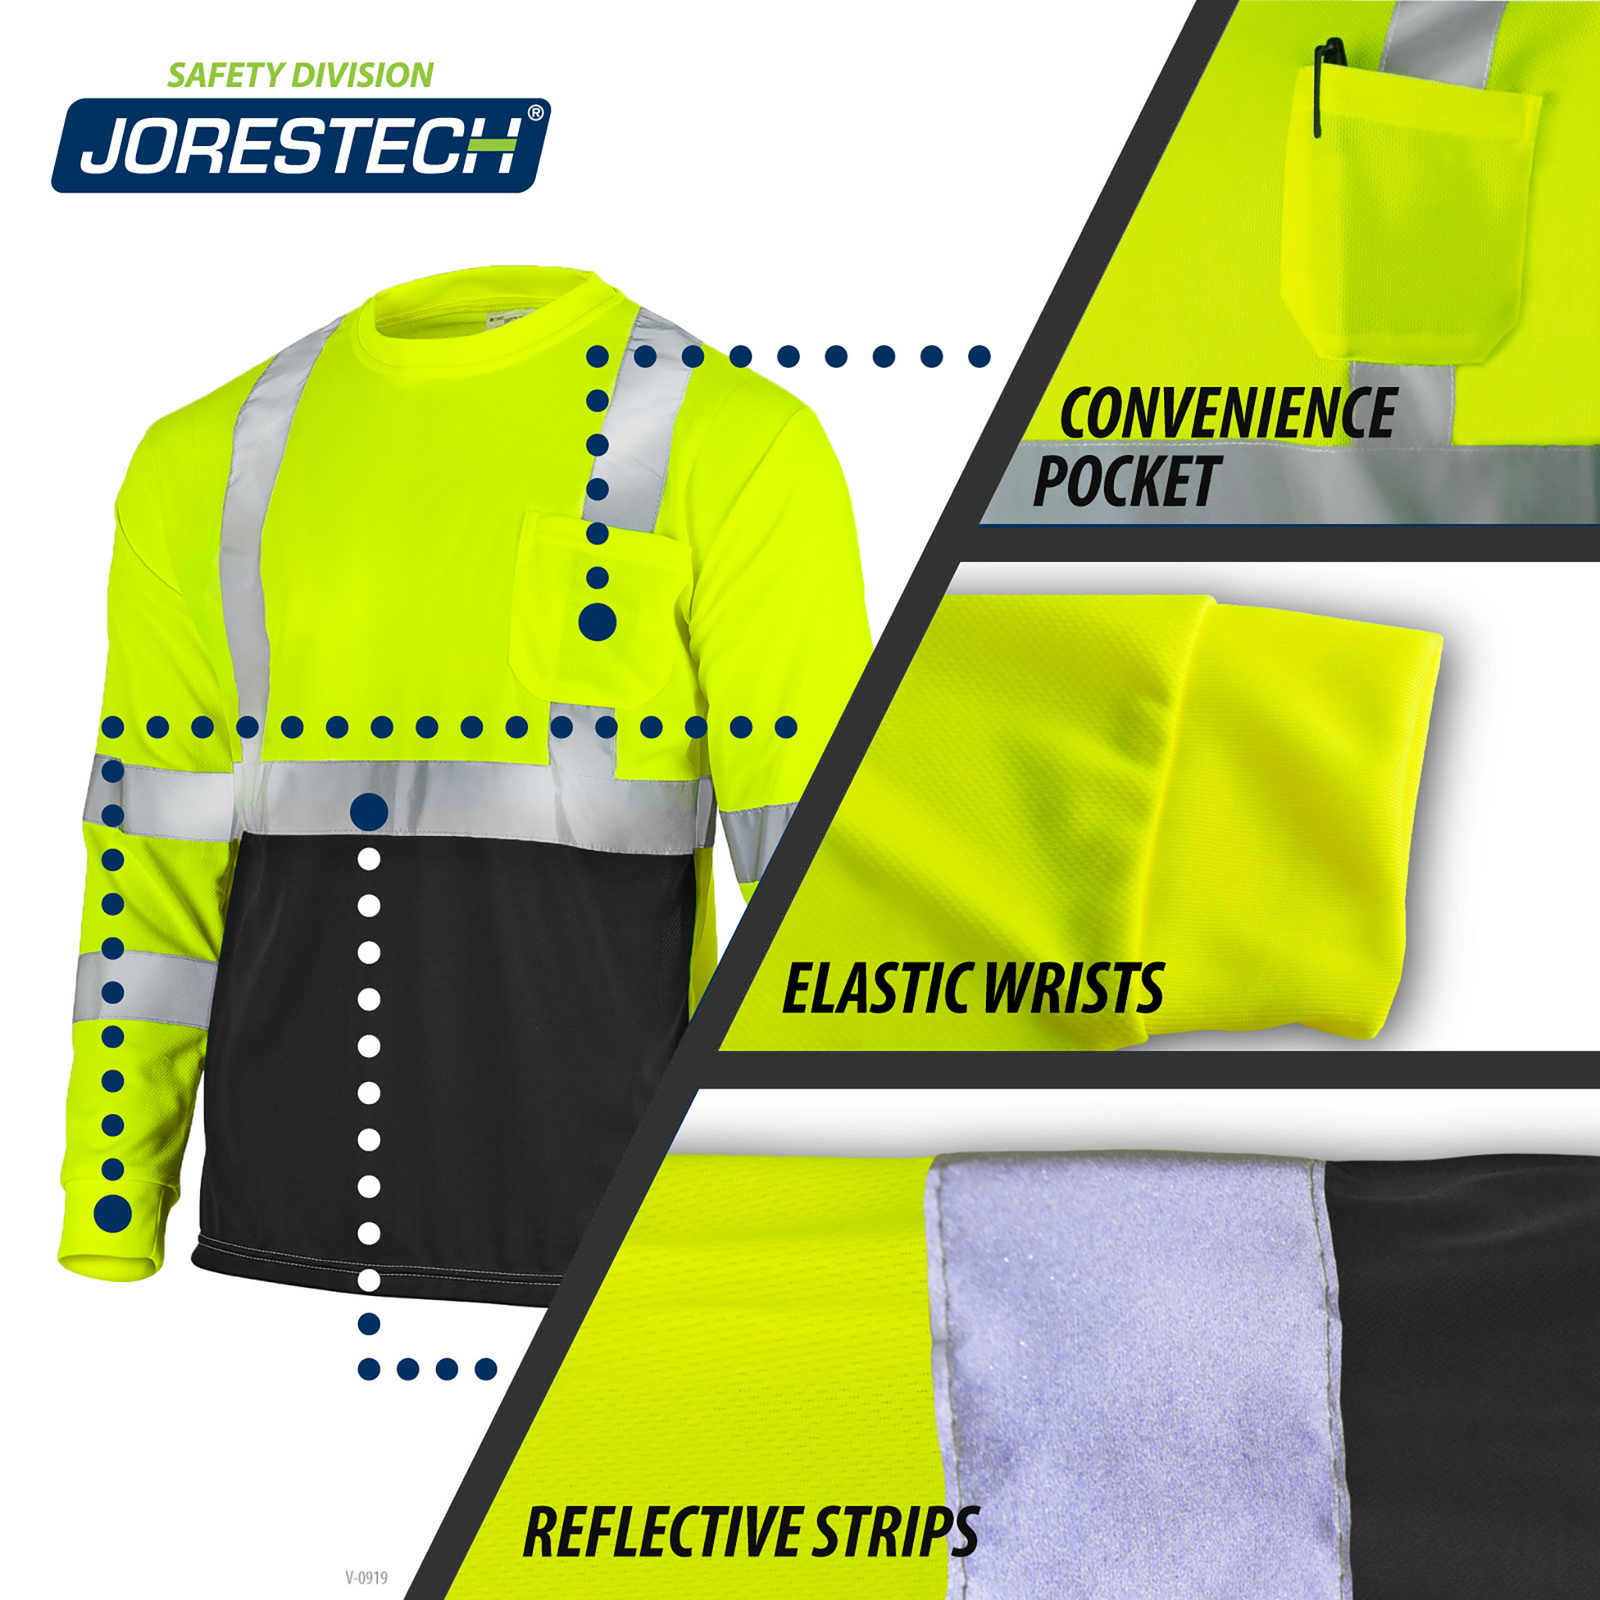 Features the JORESTECH Yellow/Black reflective shirt and 3 call outs that read: refined convenience pockets, elastic wrist, reflective strips.